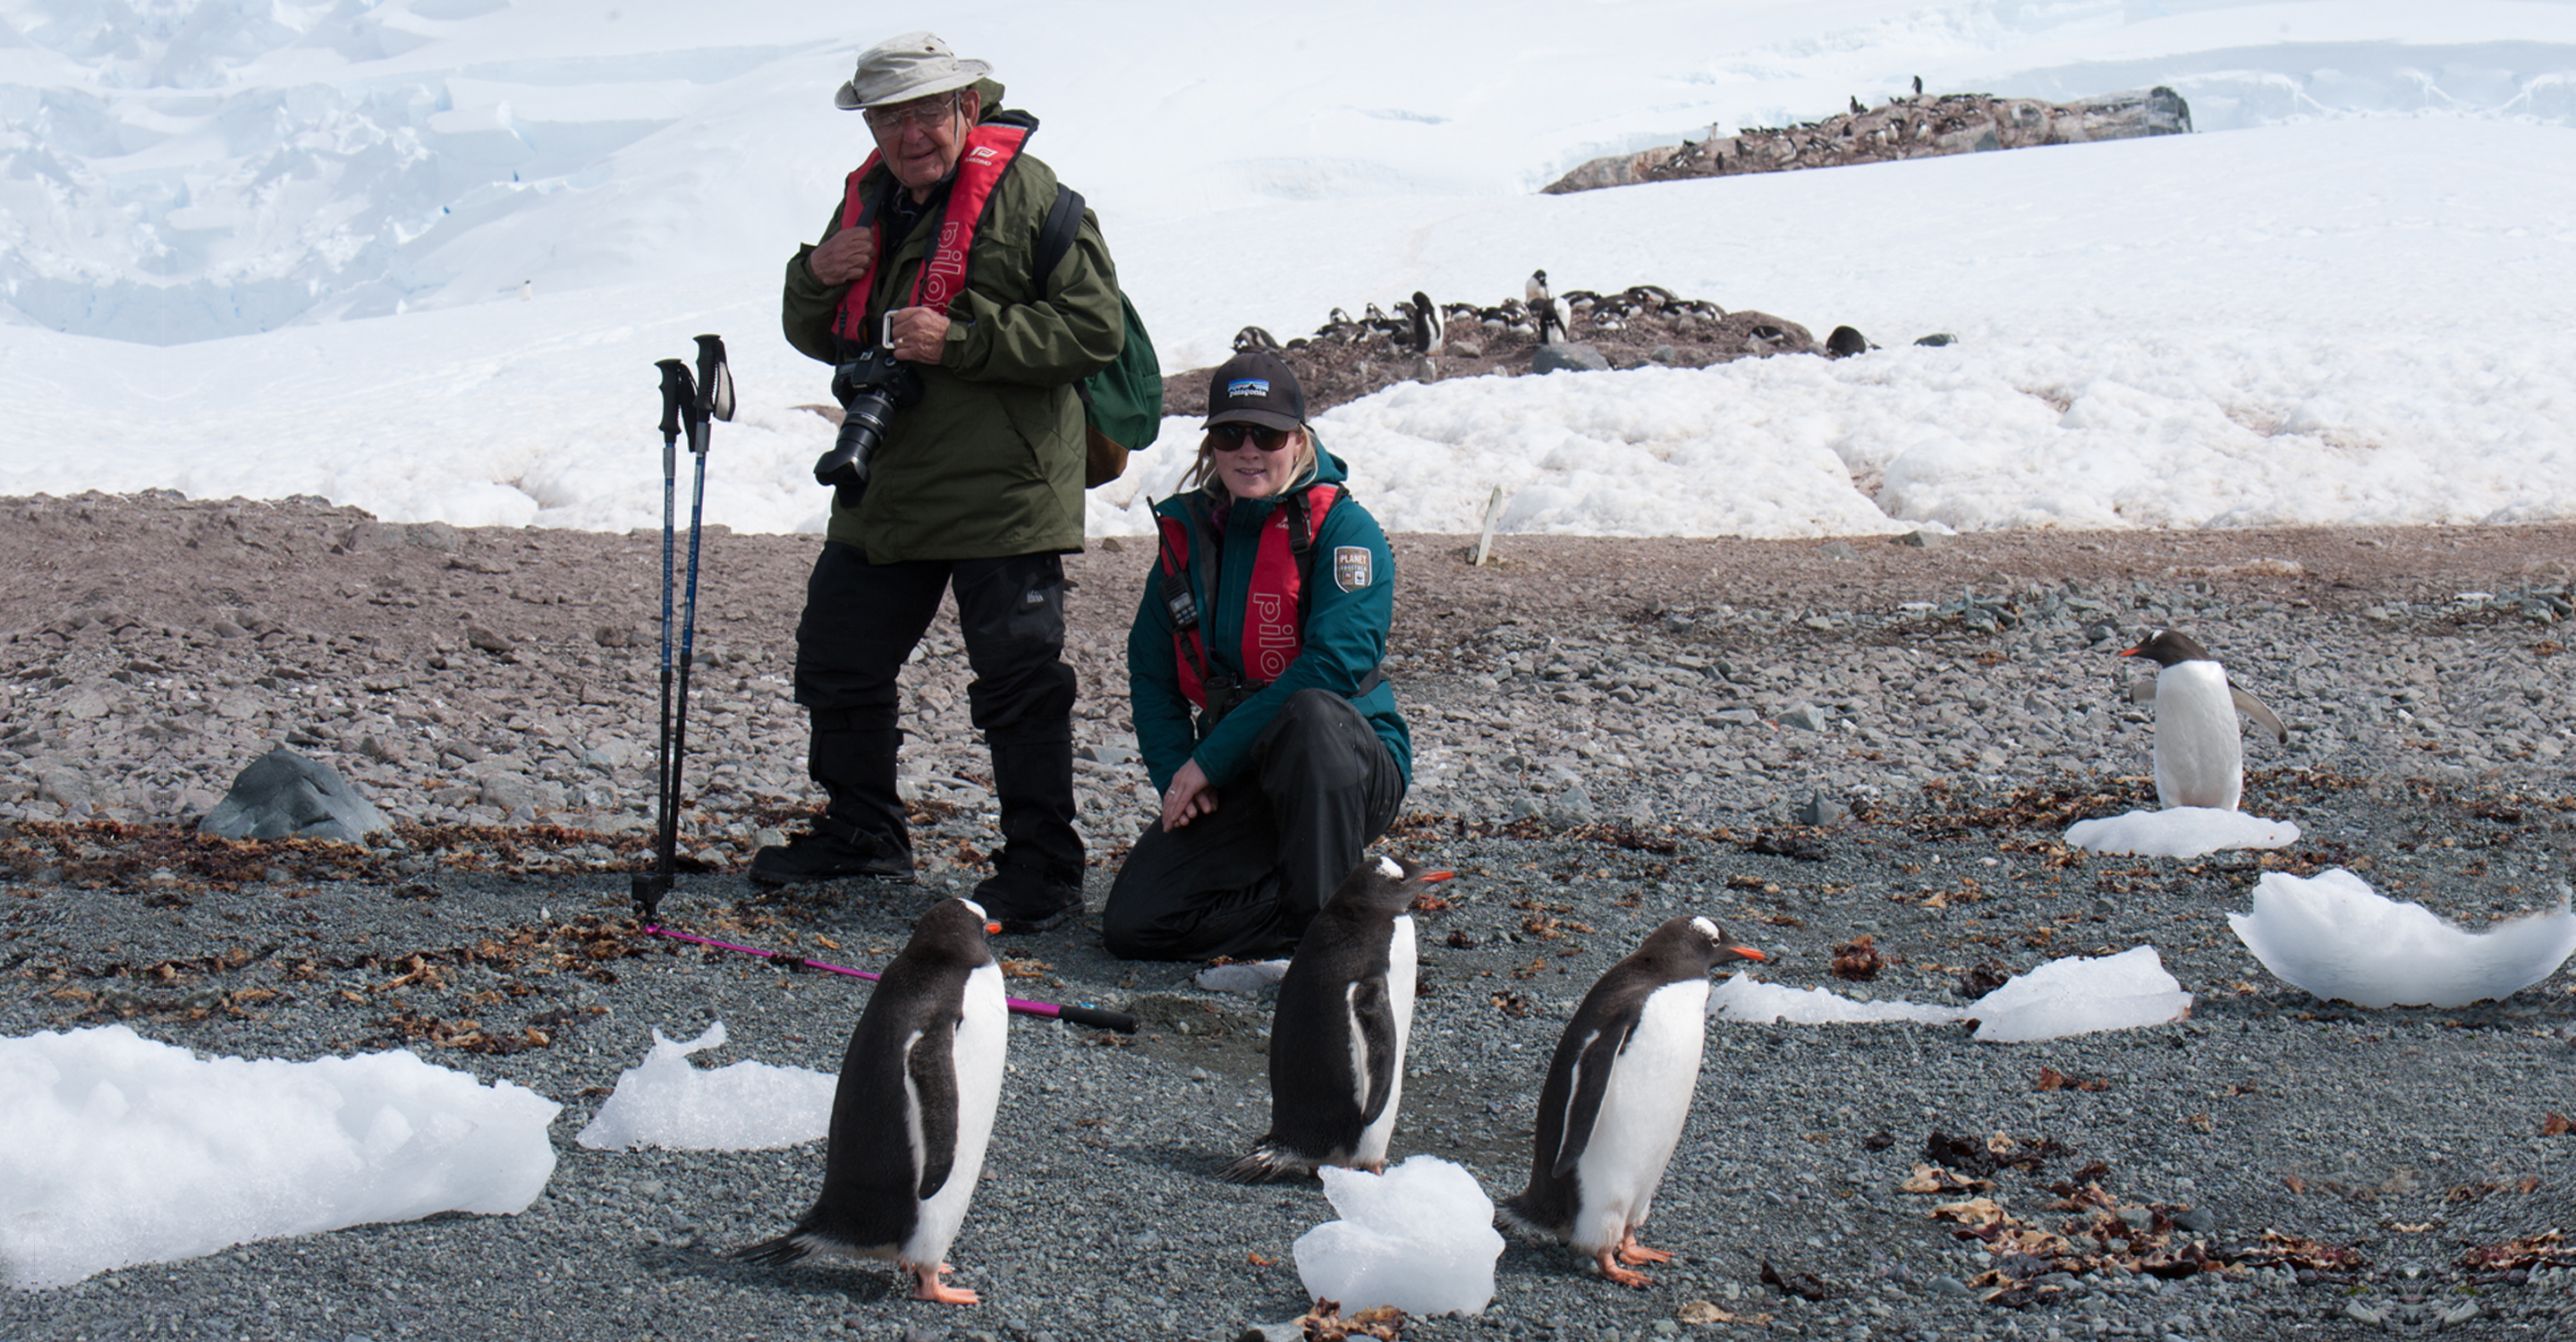 A Natural Habitat Adventures Expedition Leader and traveler stop to view gentoo penguins, Antarctica